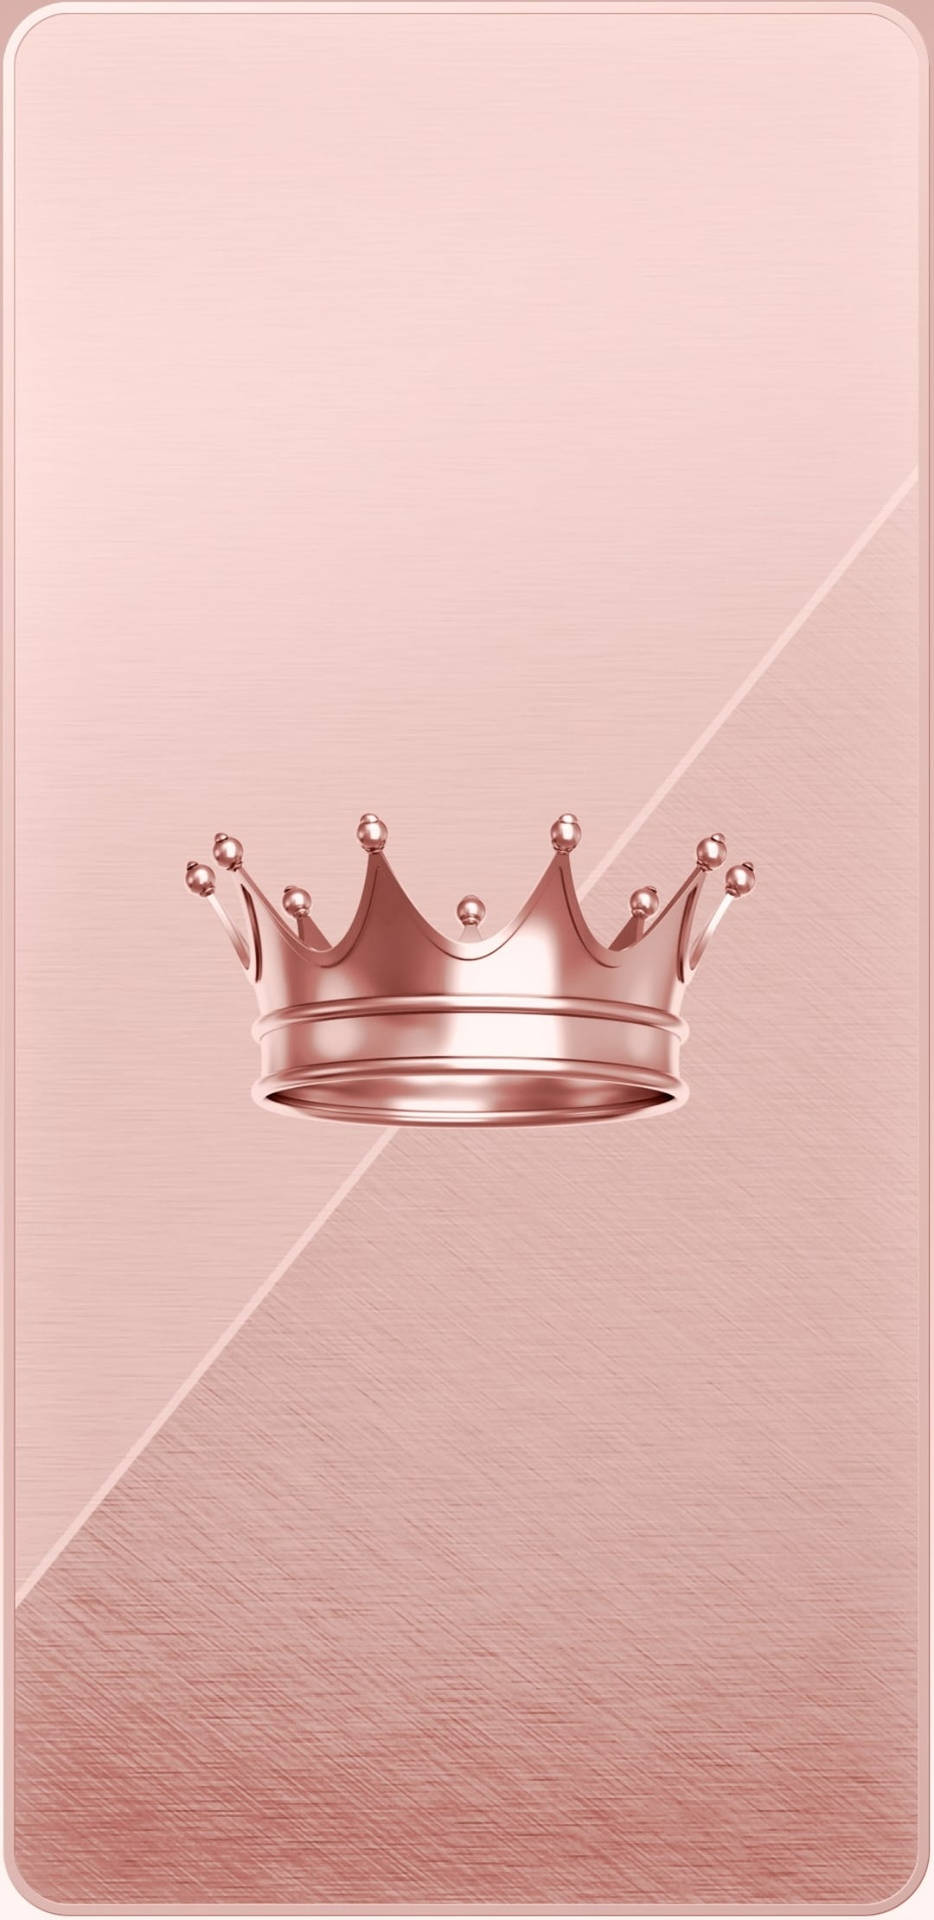 Girly Crown Wallpapers